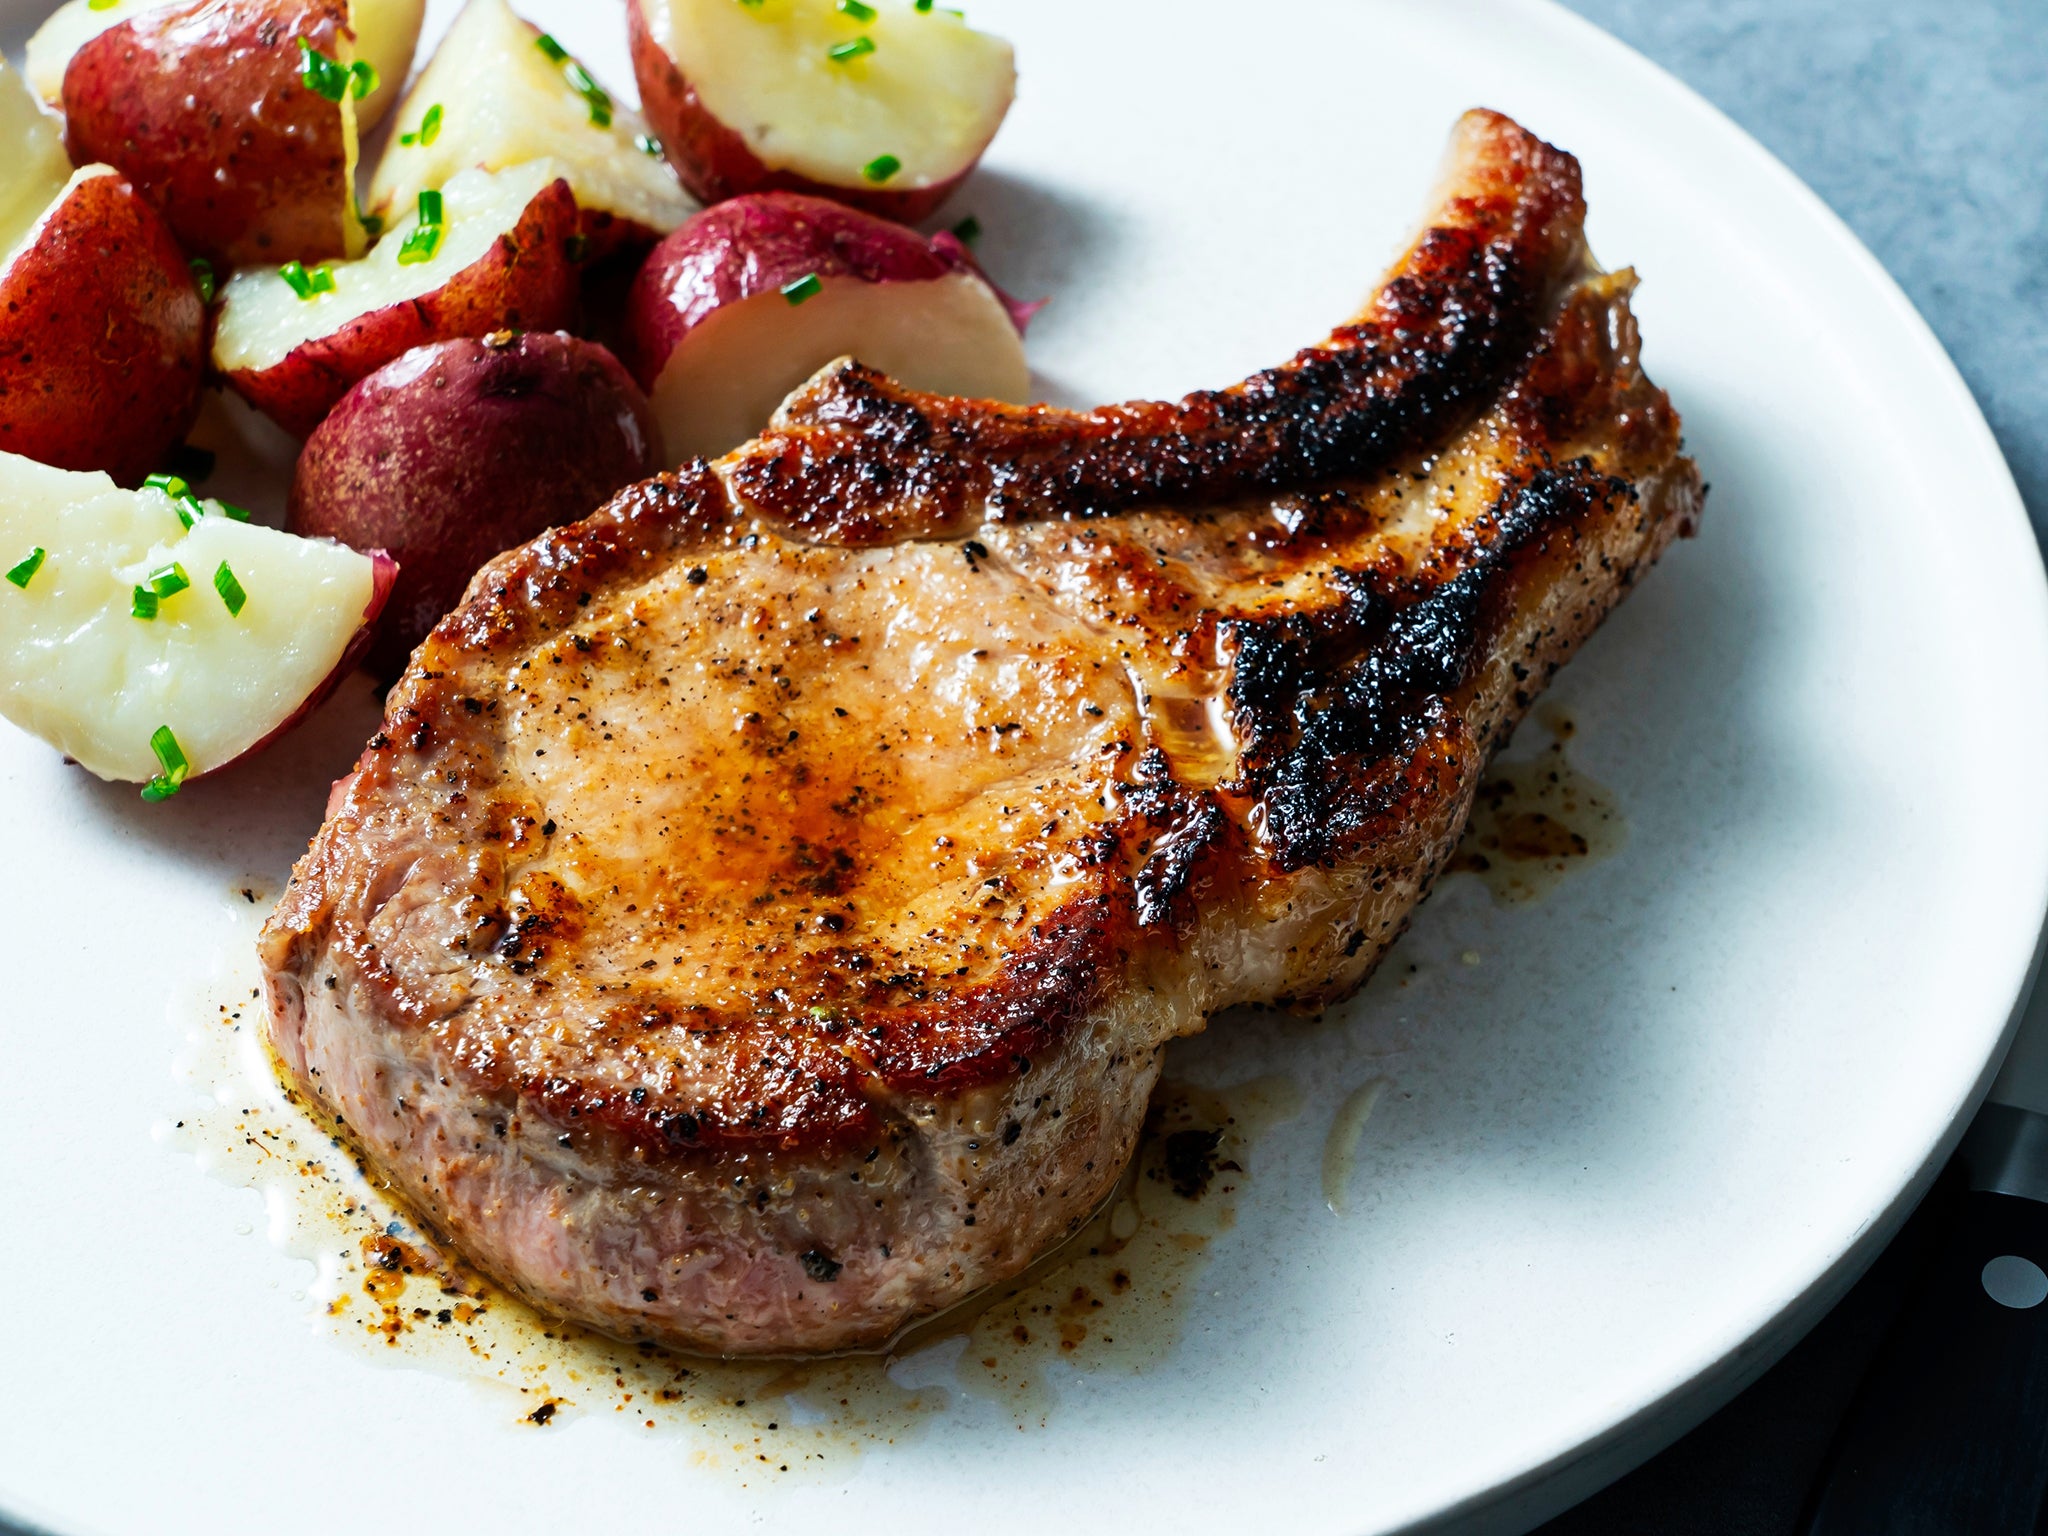 How To Cook The Most Delicious & Juicy Pork Chops!